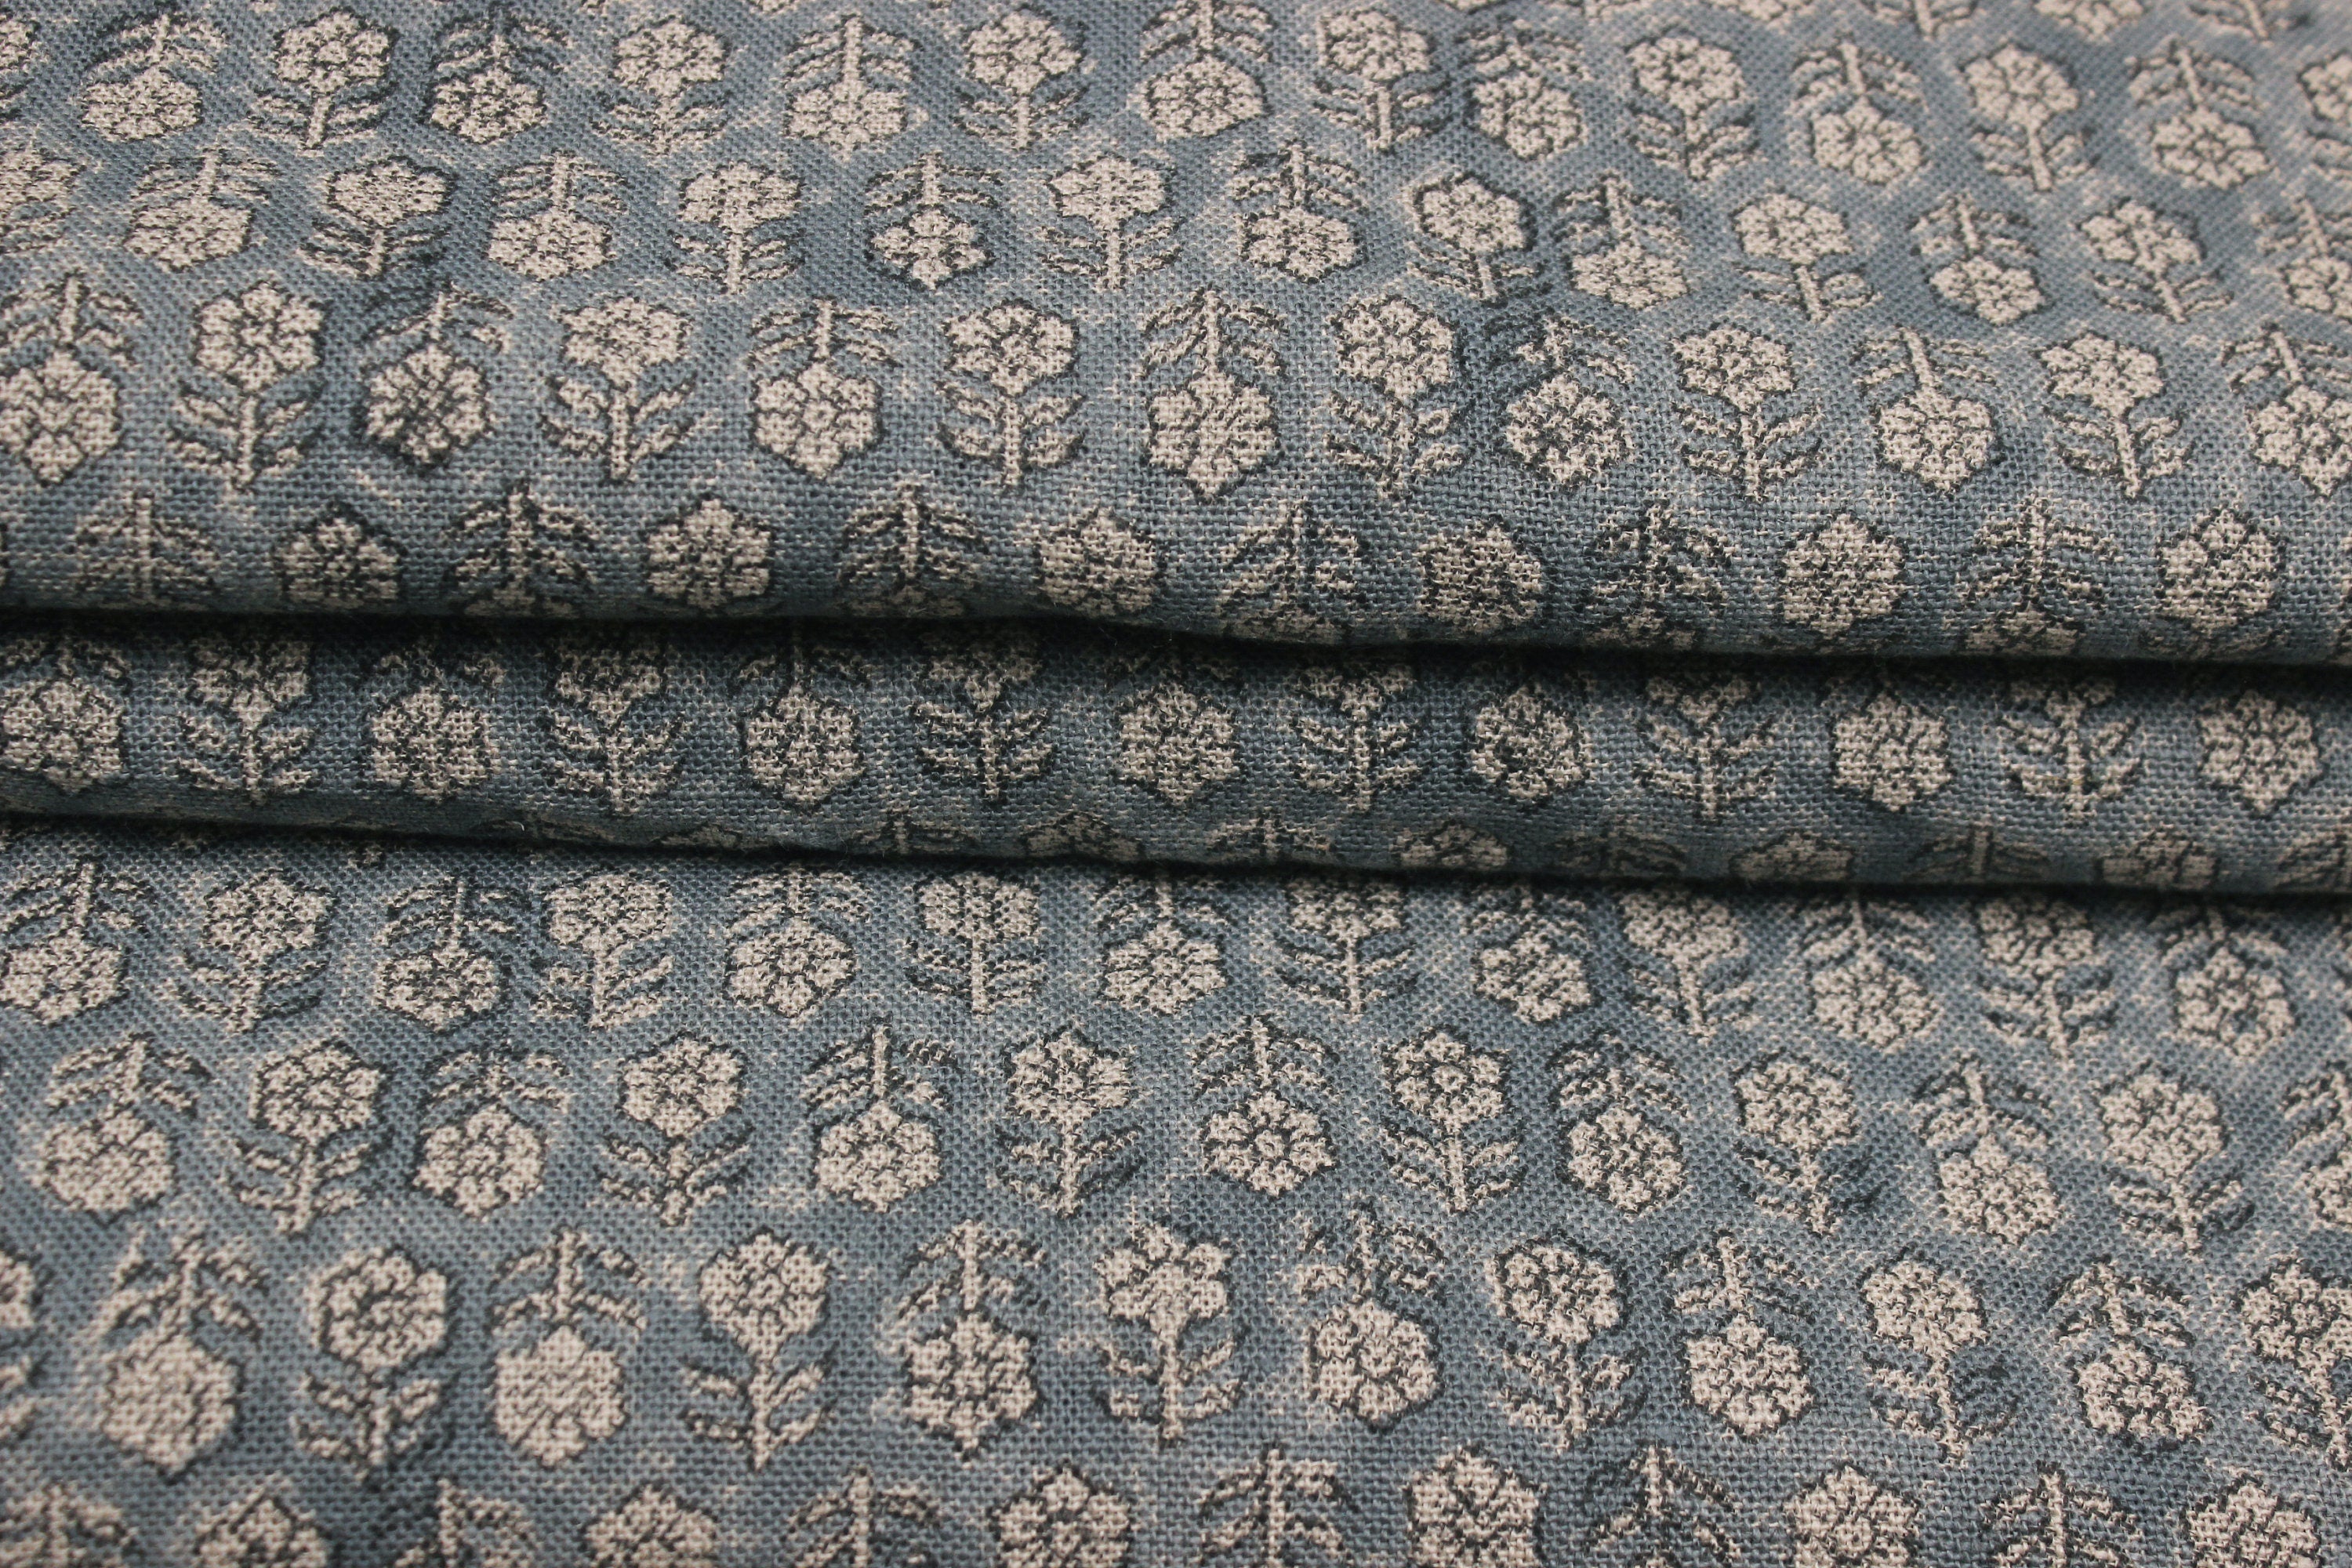 Block Print Linen Fabric, Tulsi Buti Floral  Thick Handloom Linen, Most Popular Indian Block Print For Pillow Cases, Upholstery And Thanksgiving Decor